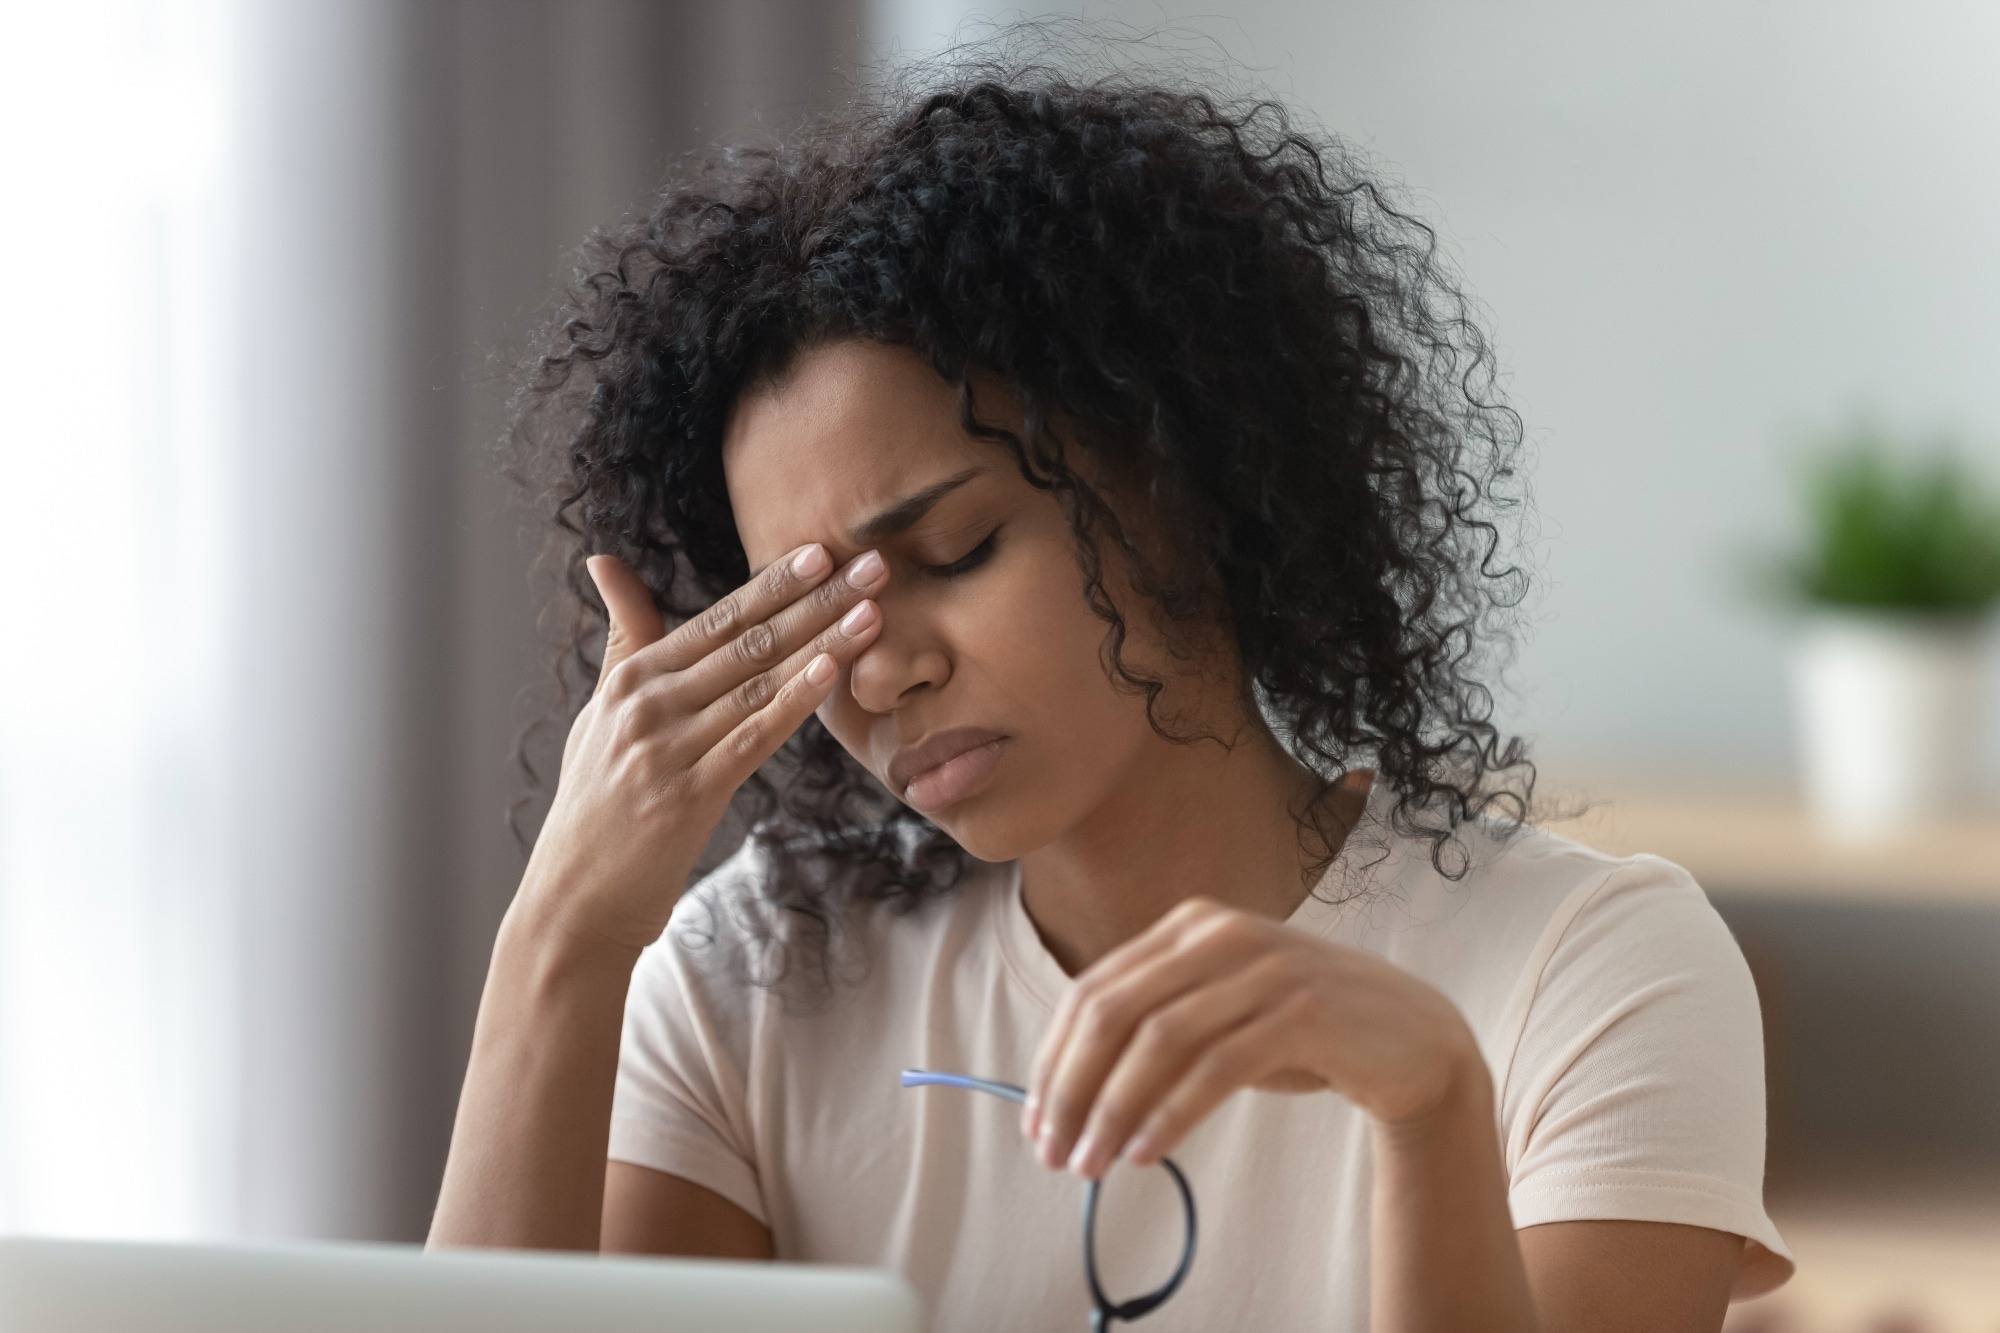 Study: Population Based Characterization of Menstrual Migraine and Proposed Diagnostic Criteria. Image Credit: fizkes / Shutterstock.com